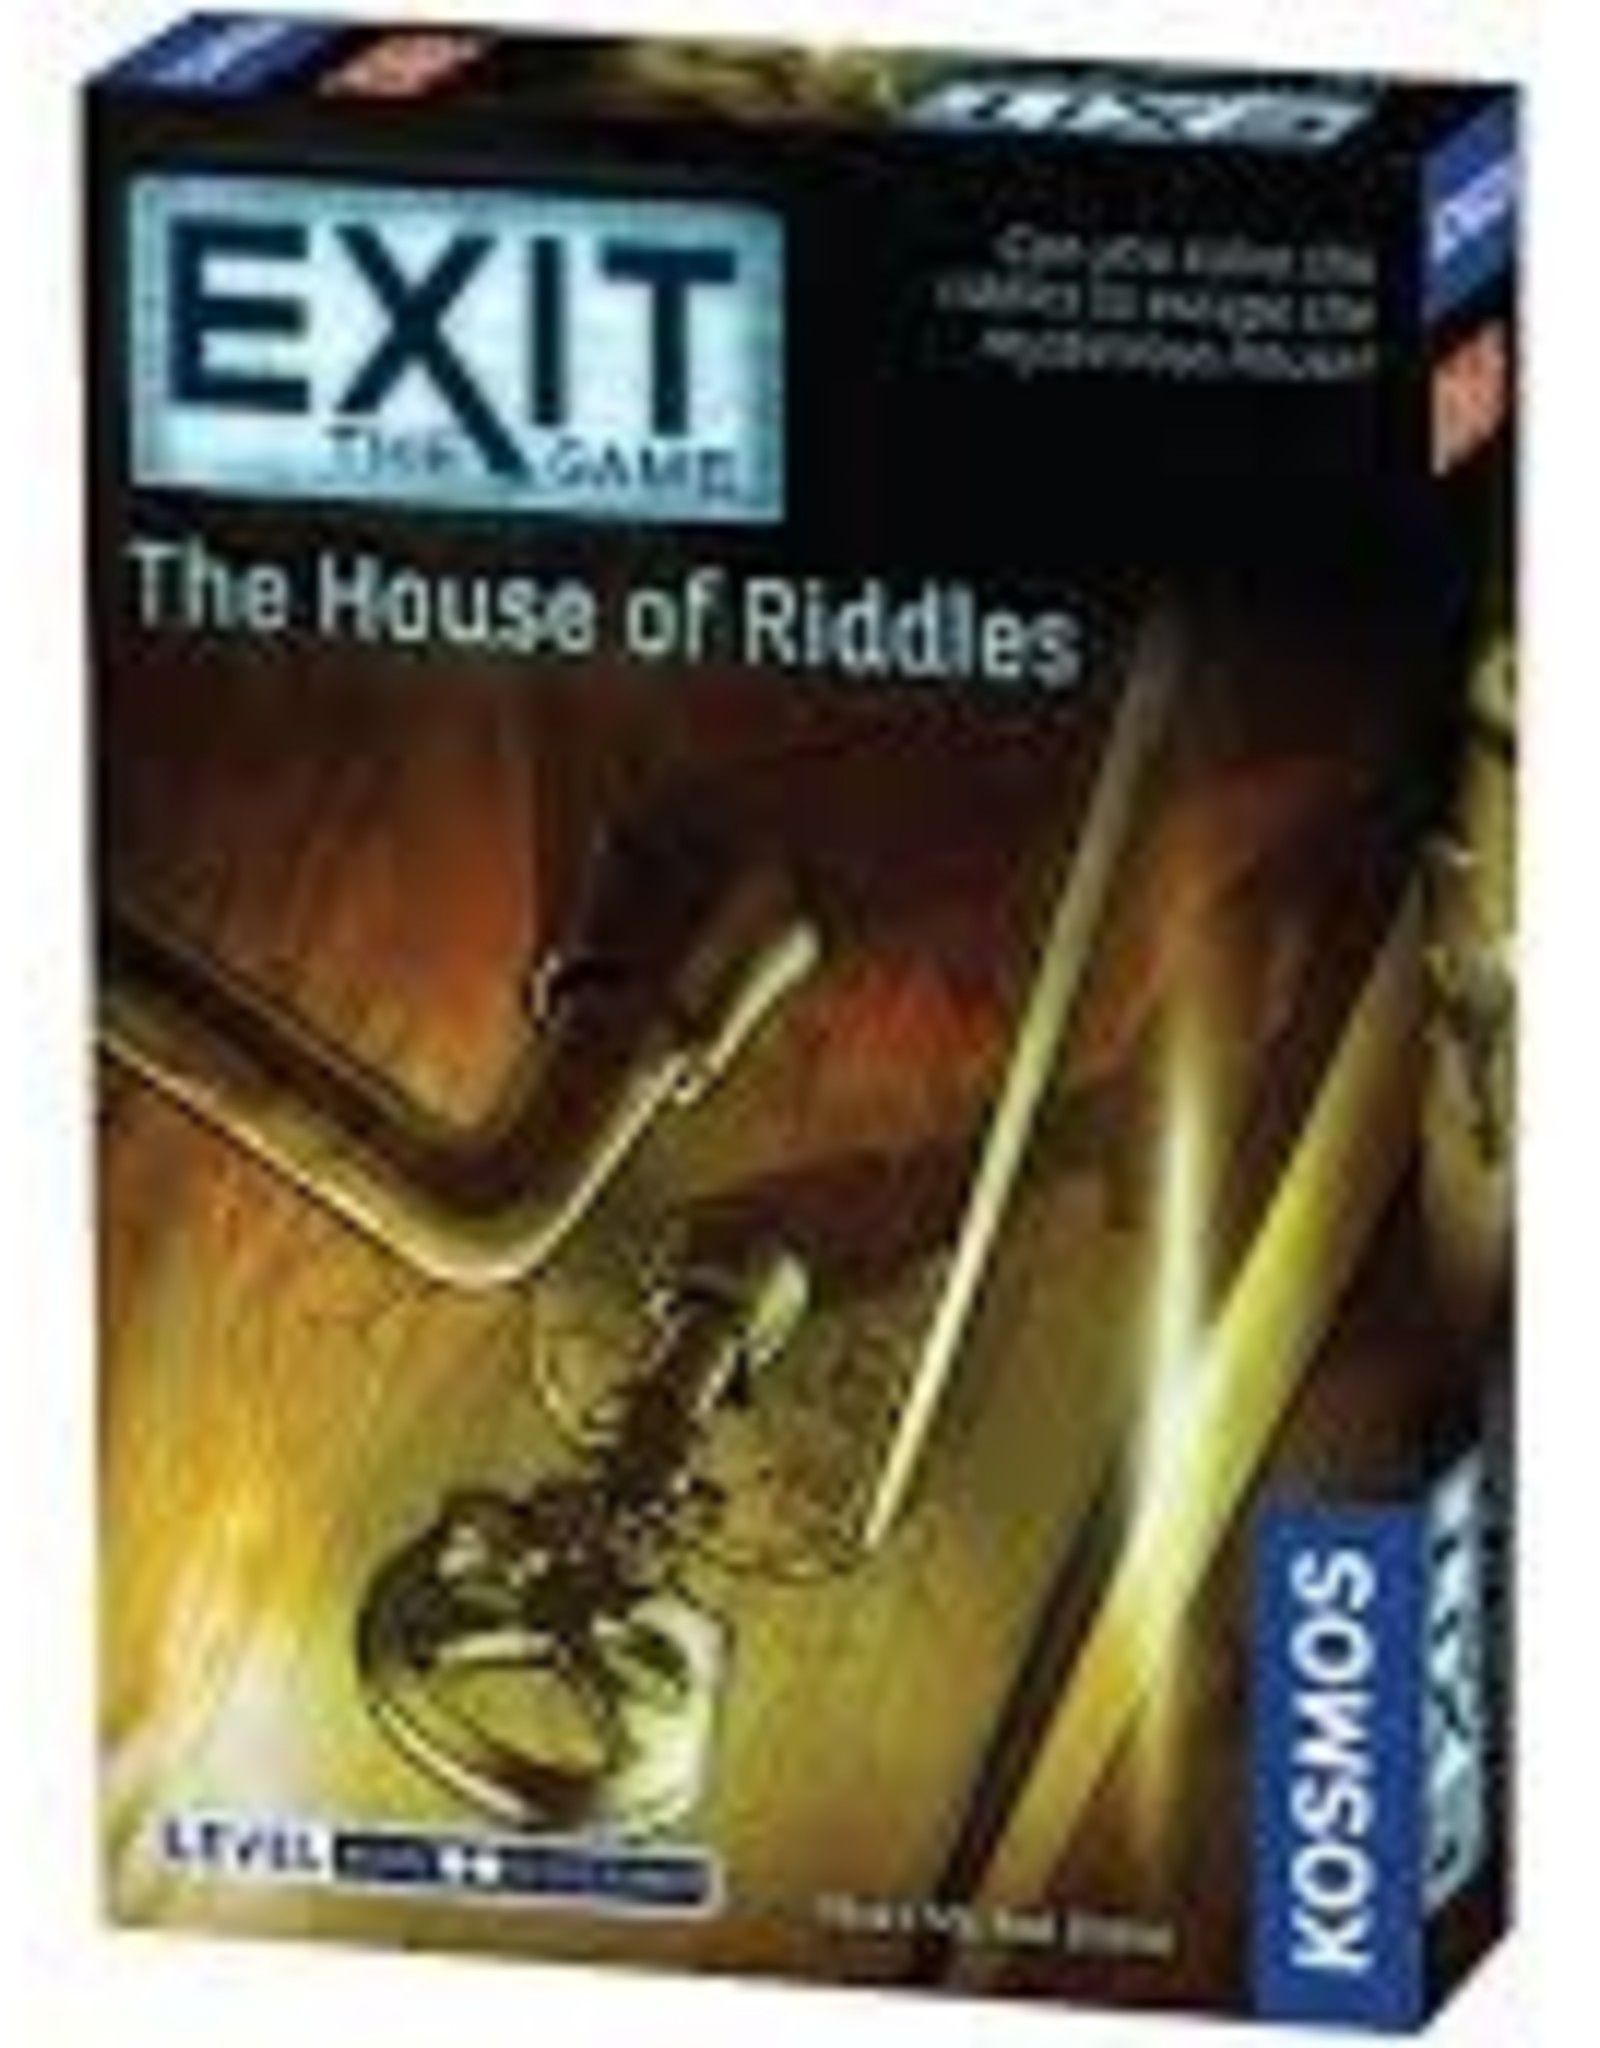 Thames & Kosmos EXIT - The House of Riddles